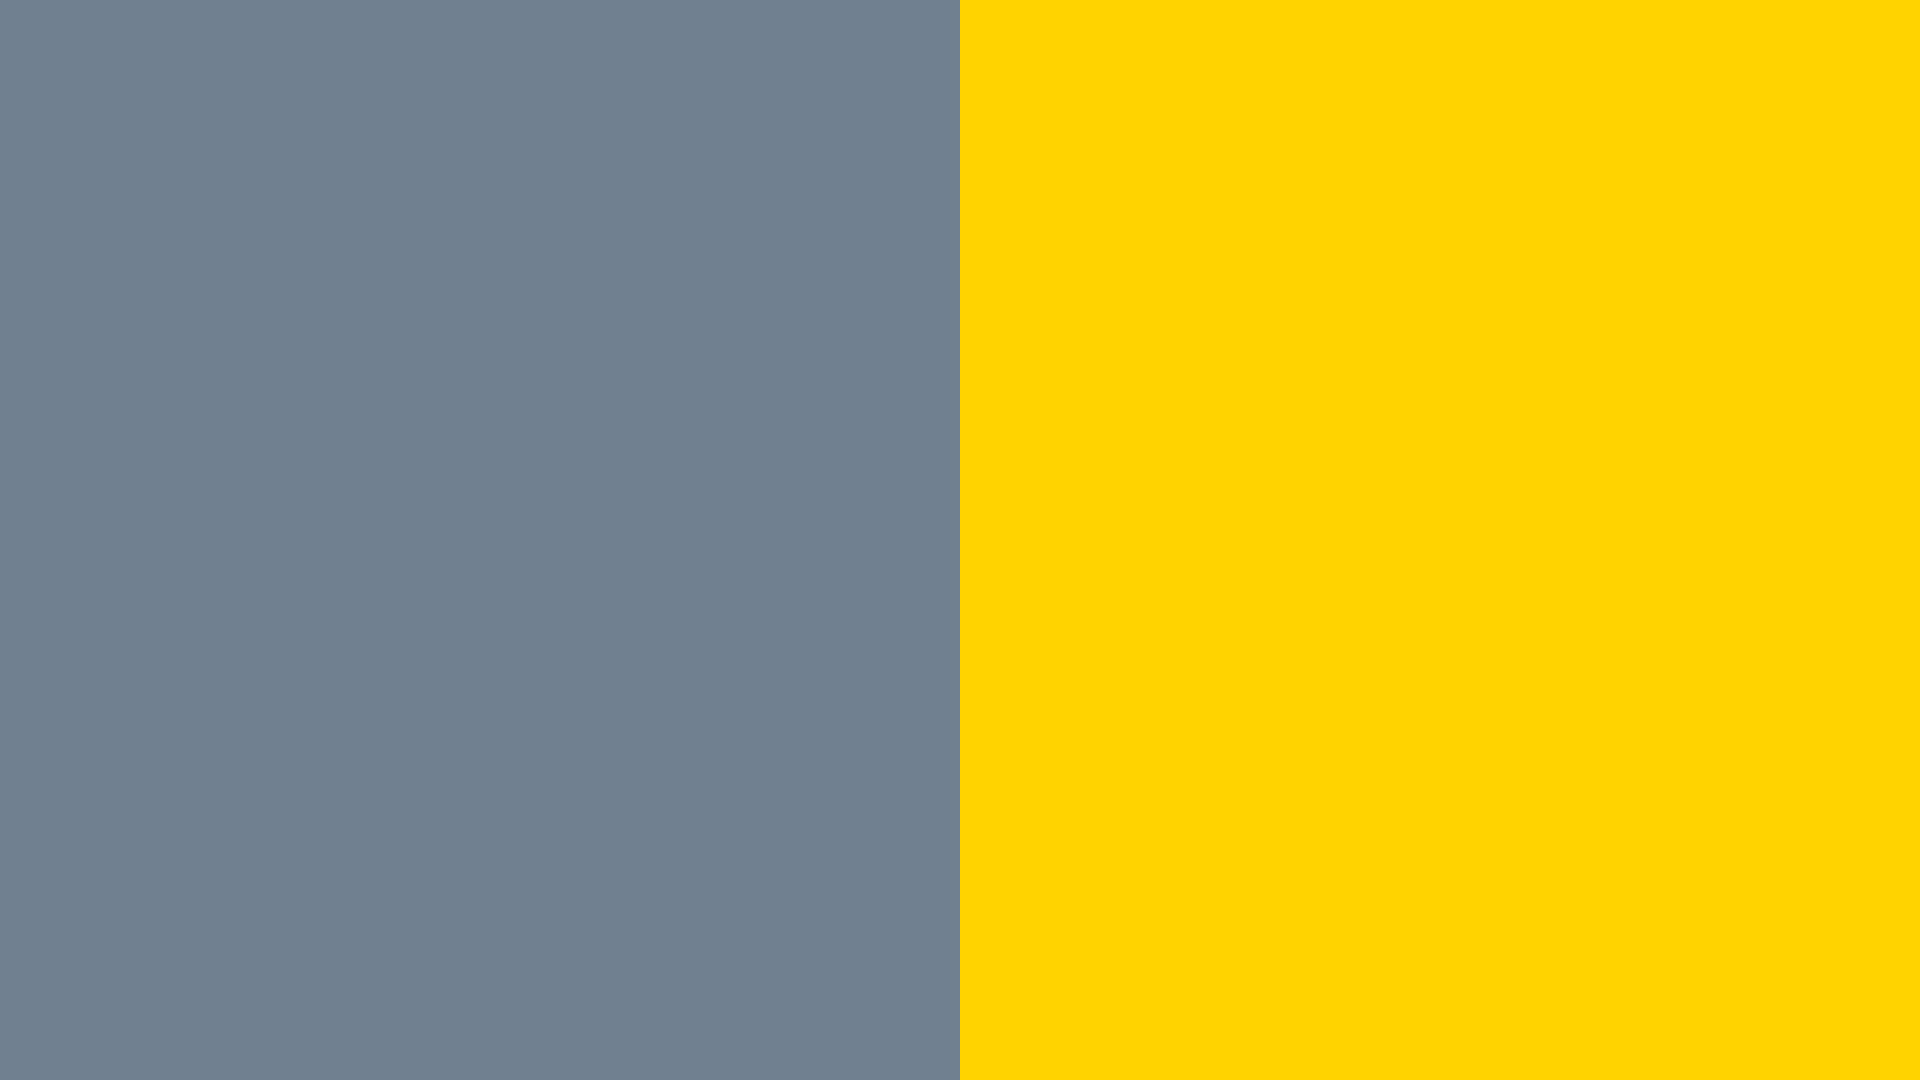 Color Of The Year: Ultimate Gray and Bright Yellow